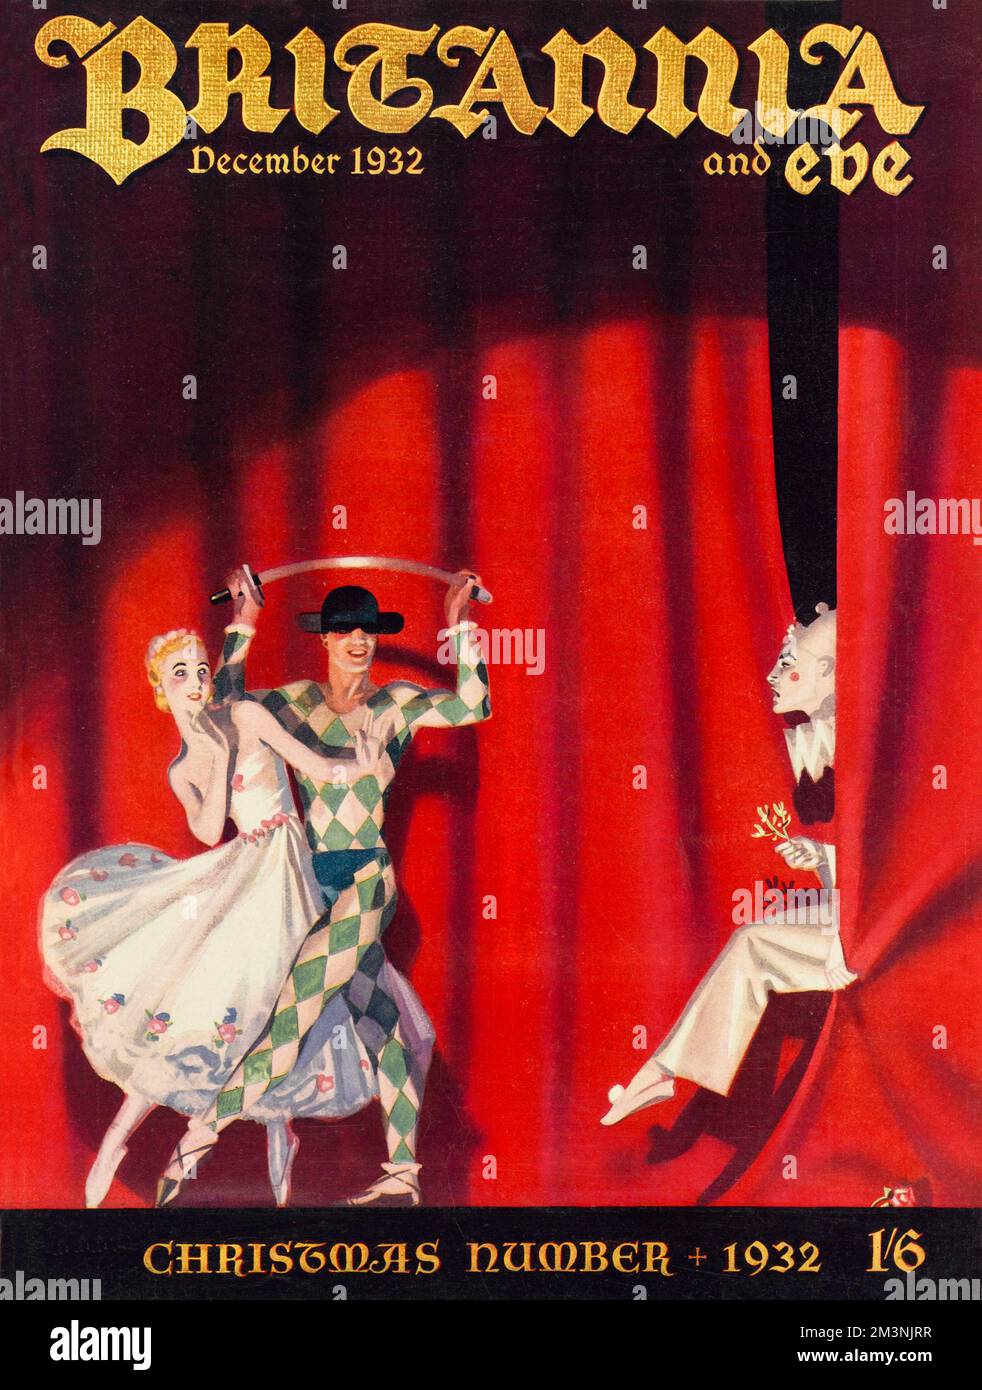 Front cover illustration featuring a ballerina, harlequin and clown performing a rather dramatic scene with a sword on stage. The harlequin protects the helpless princess ballerina from the advances of the clown, who steps out menacingly from the red theatre curtains.     Date: 1932 Stock Photo